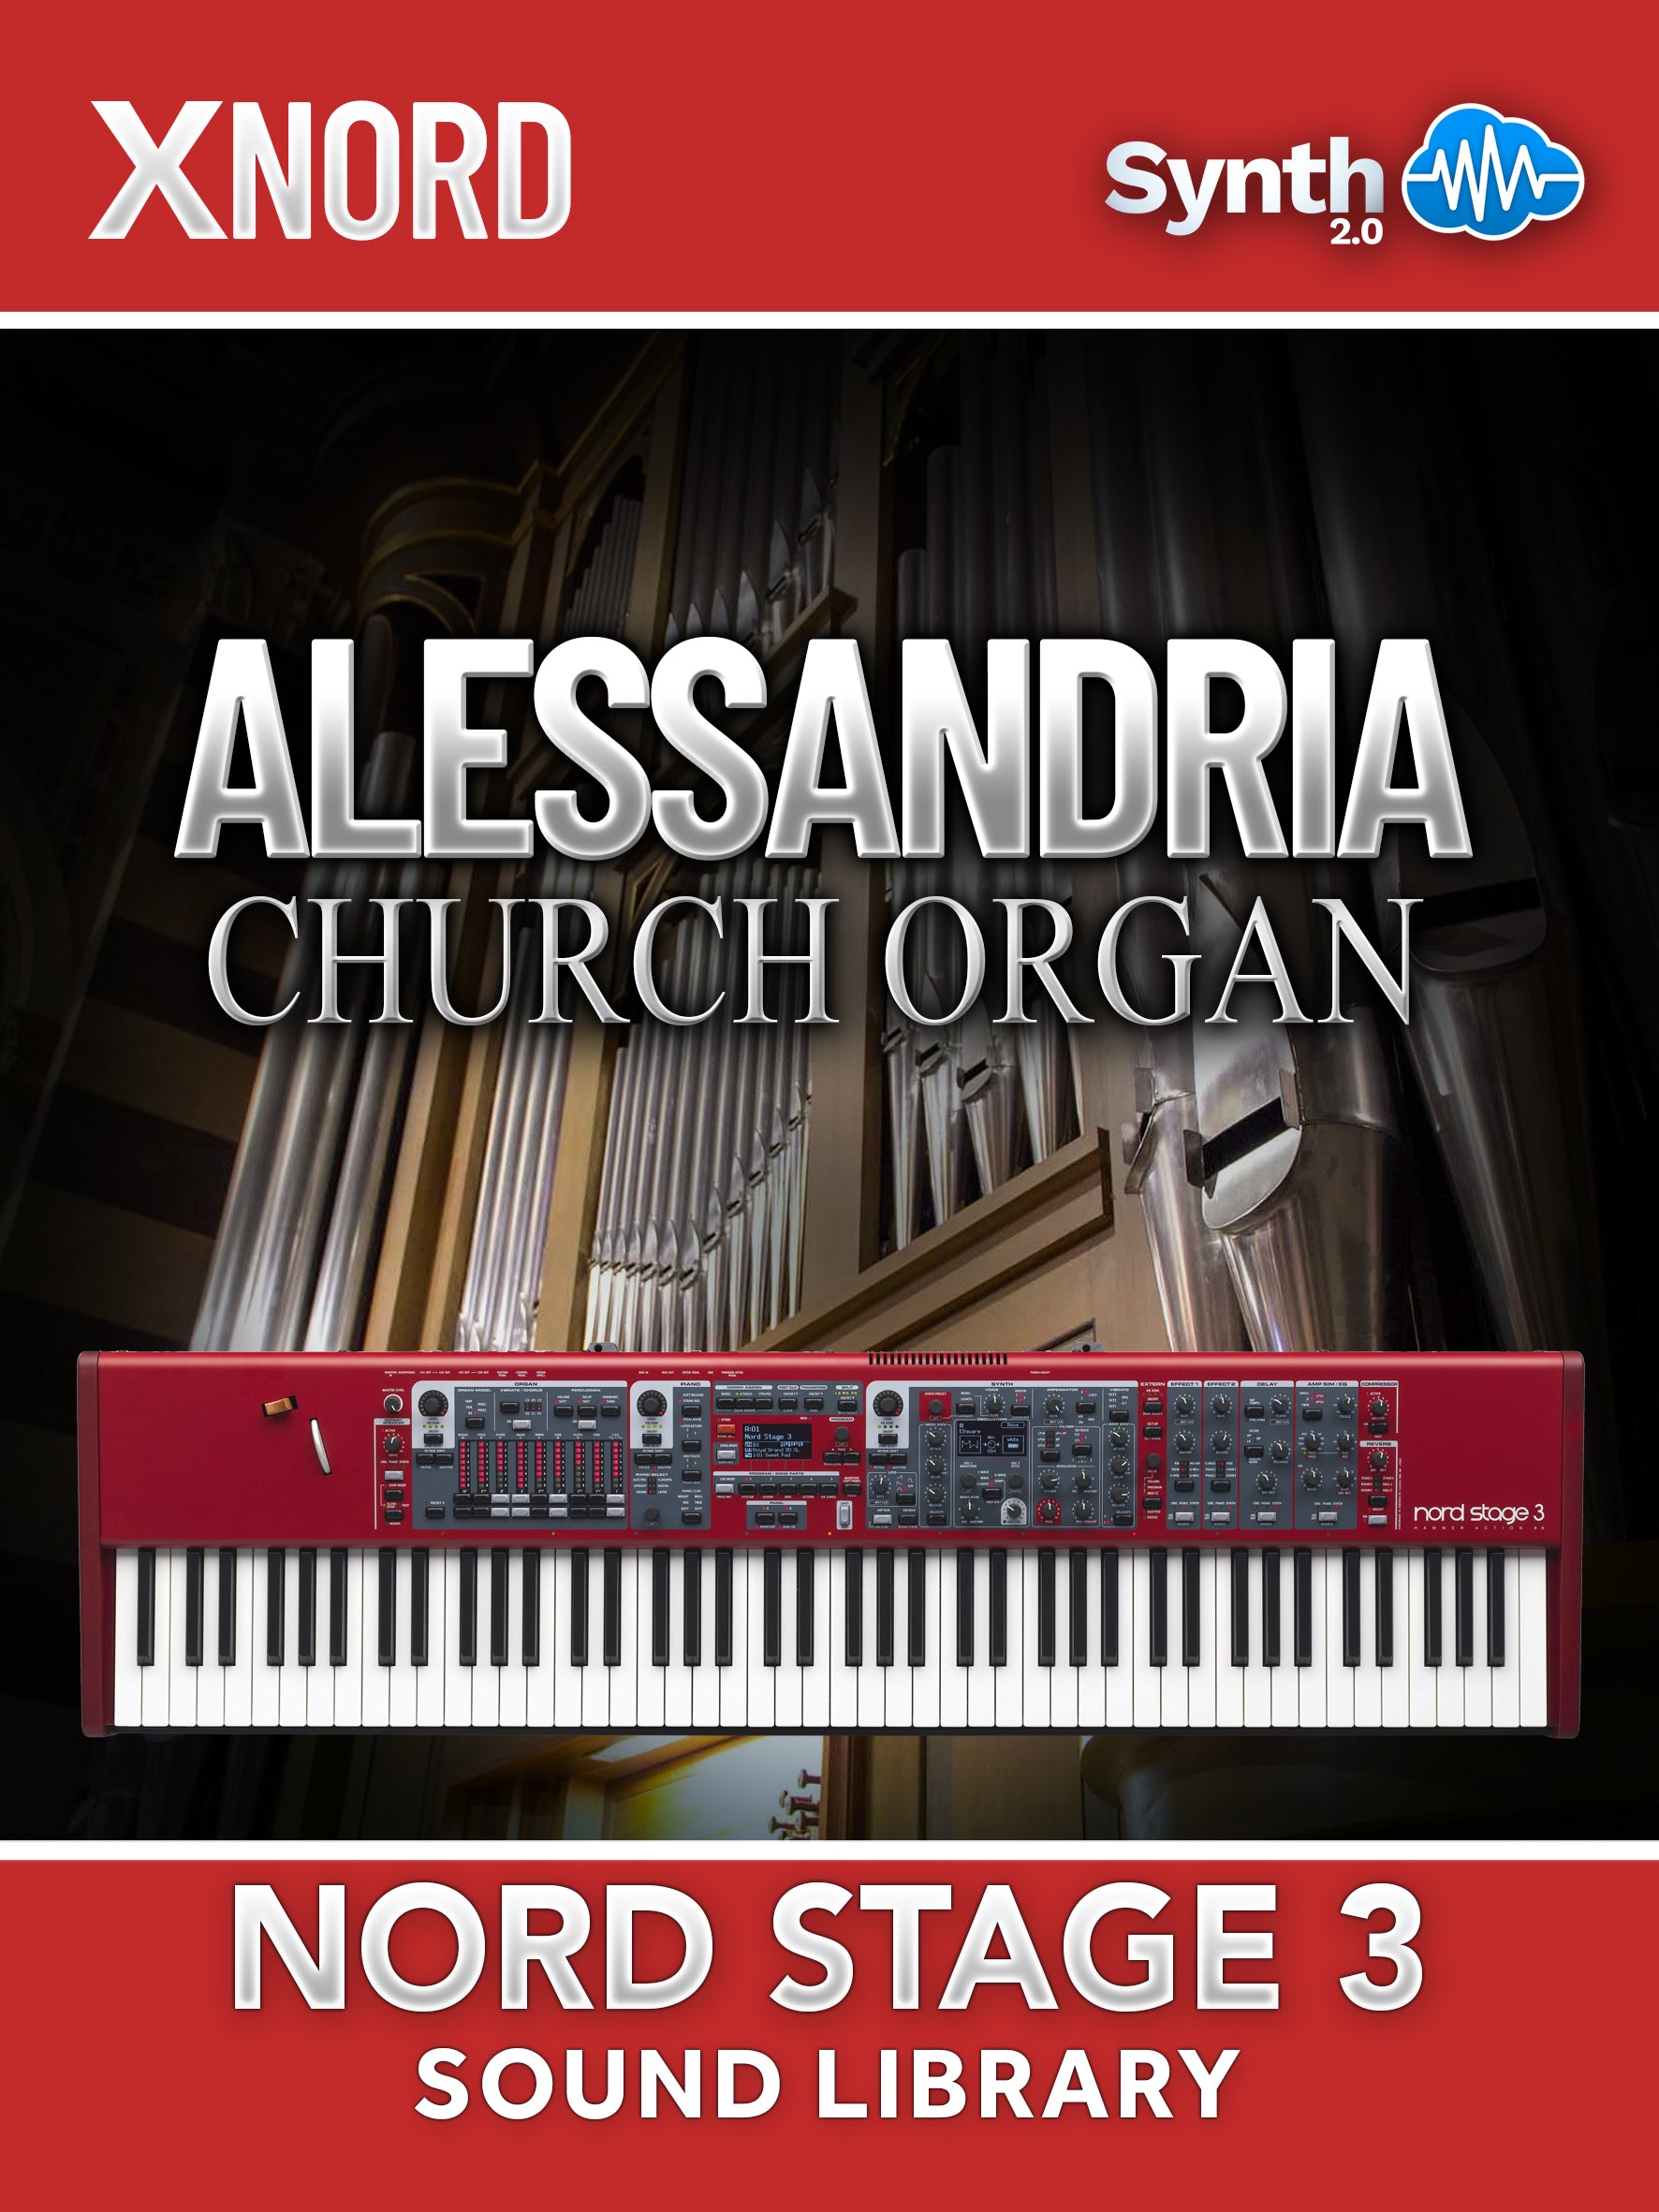 RCL011 - Alessandria Church Organ - Nord Stage 3 ( 29 presets )